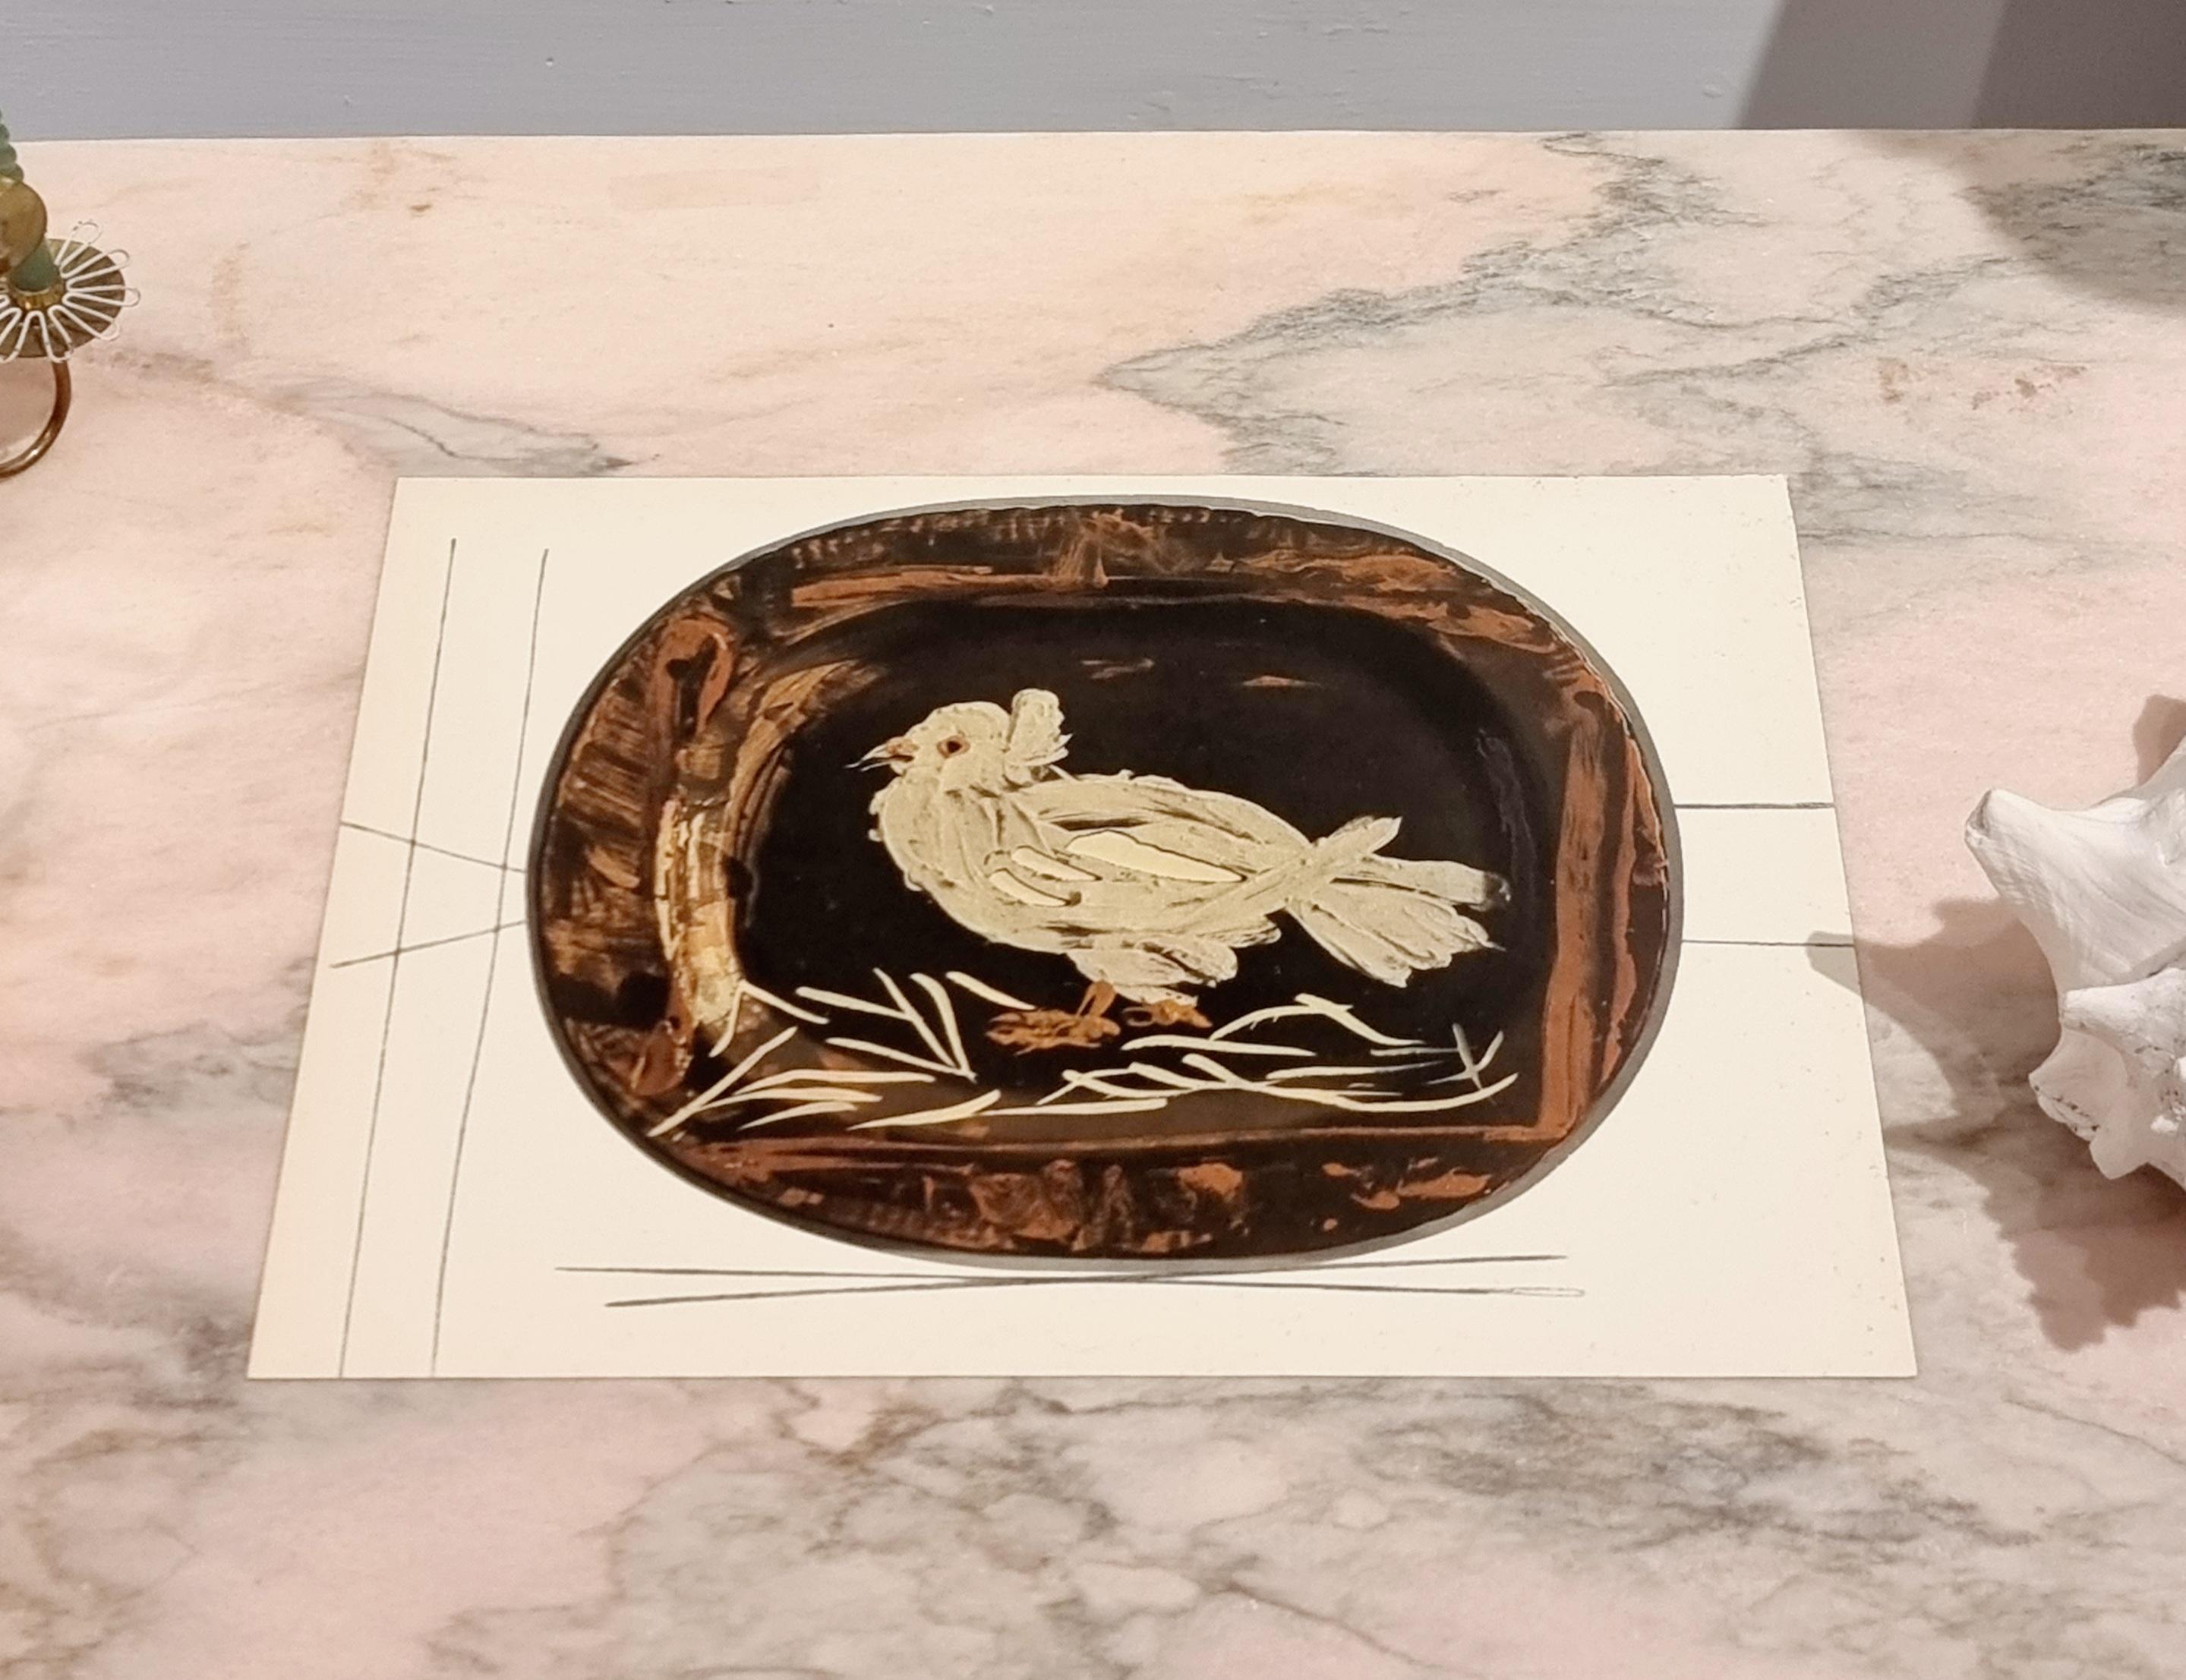 An exquisite shiny polychrome print of Picasso Vallauris ceramic plate depicting a bird. The color print is attached to a thick, high quality paper with decorative lines. 

The print is originally from a Limited Edition Art Folio 